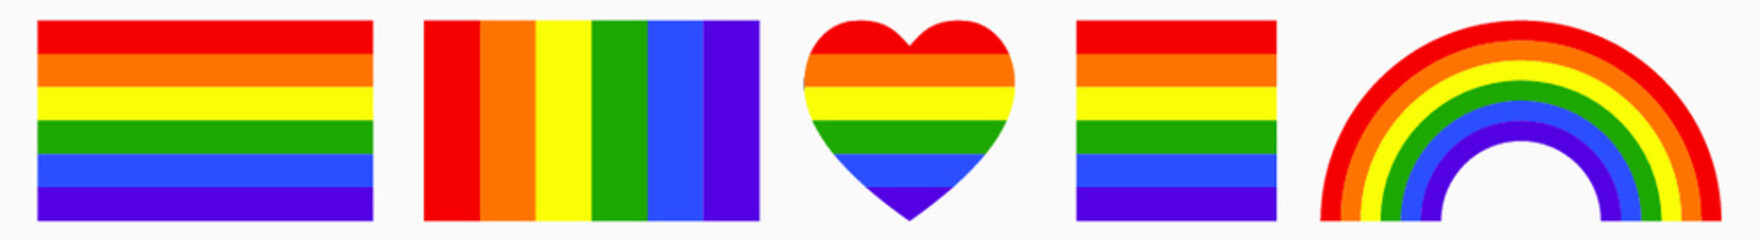 Gay Pride Rainbow Flag Vector illustration. Heart, circle, squared and rectangular shaped icons, background, banner or wallpaper. Standard colorful stripes in horizontal and vertical variant.